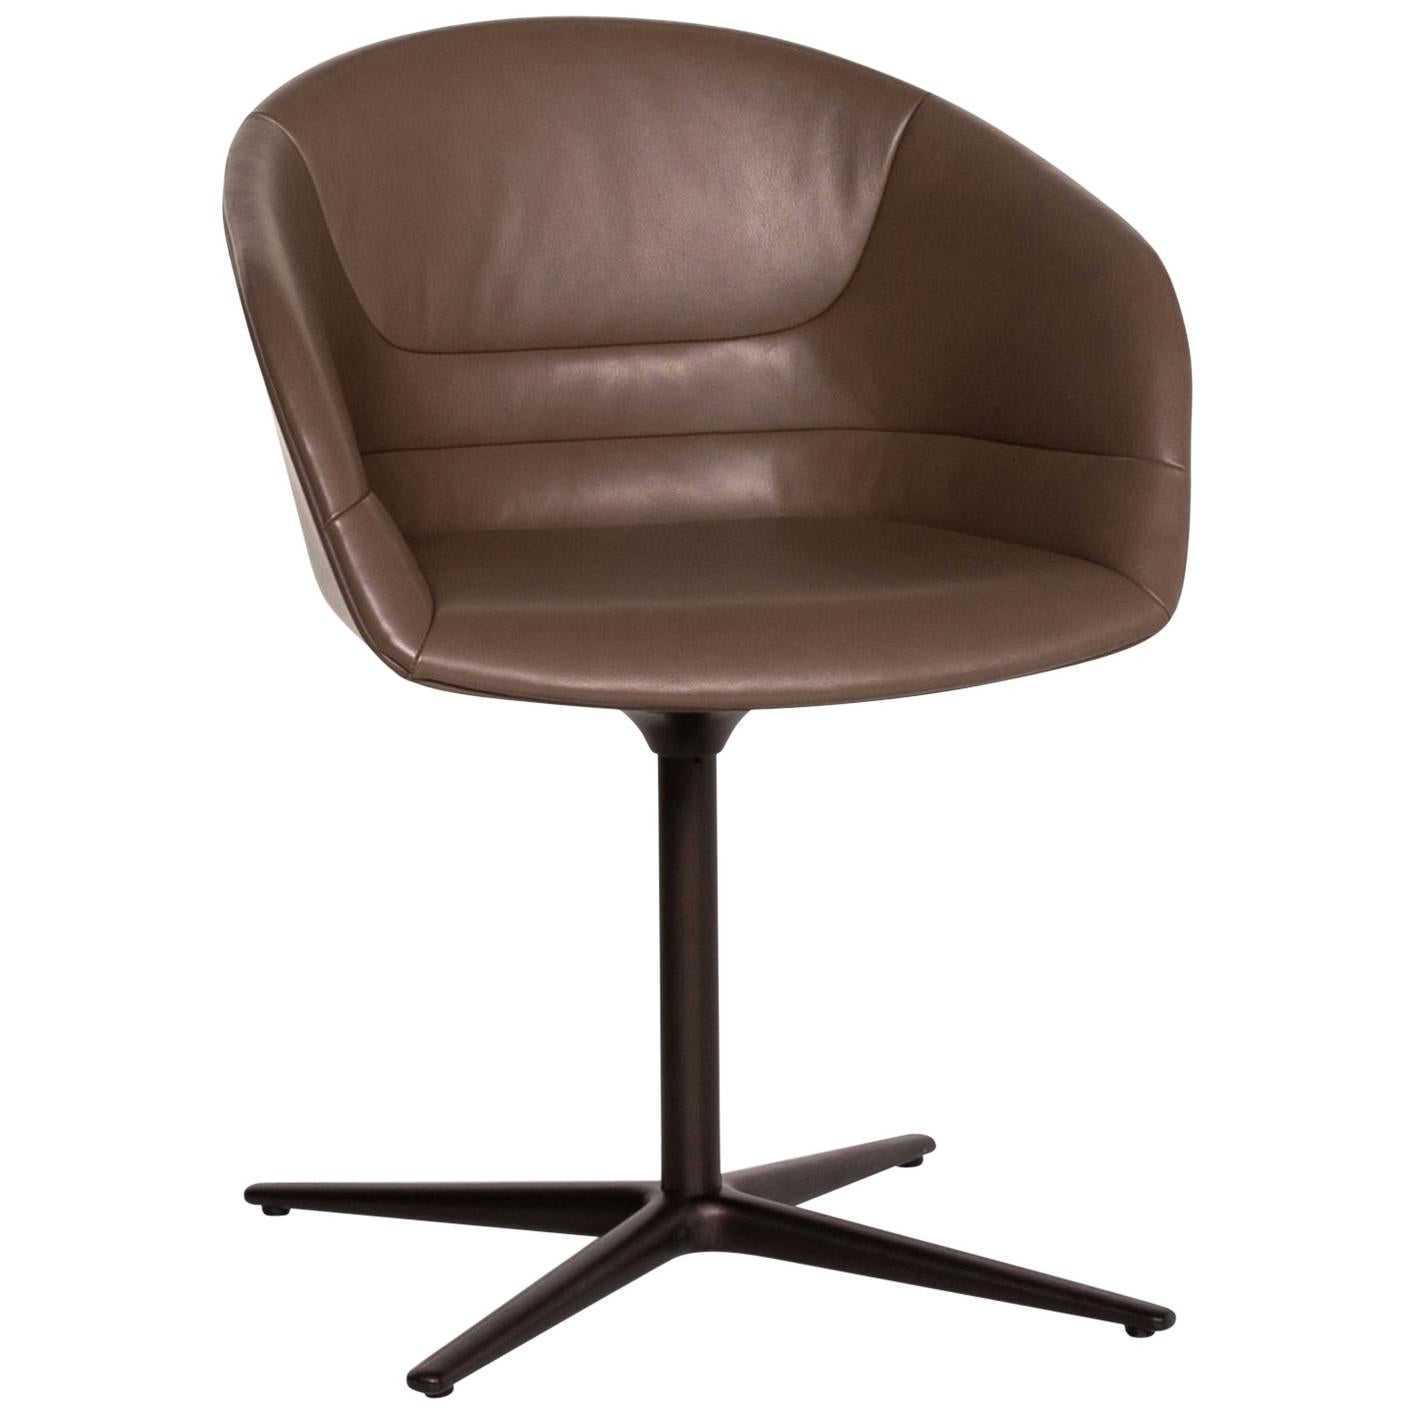 Walter Knoll Kyo Leather Armchair Gray Chair Swivel For Sale